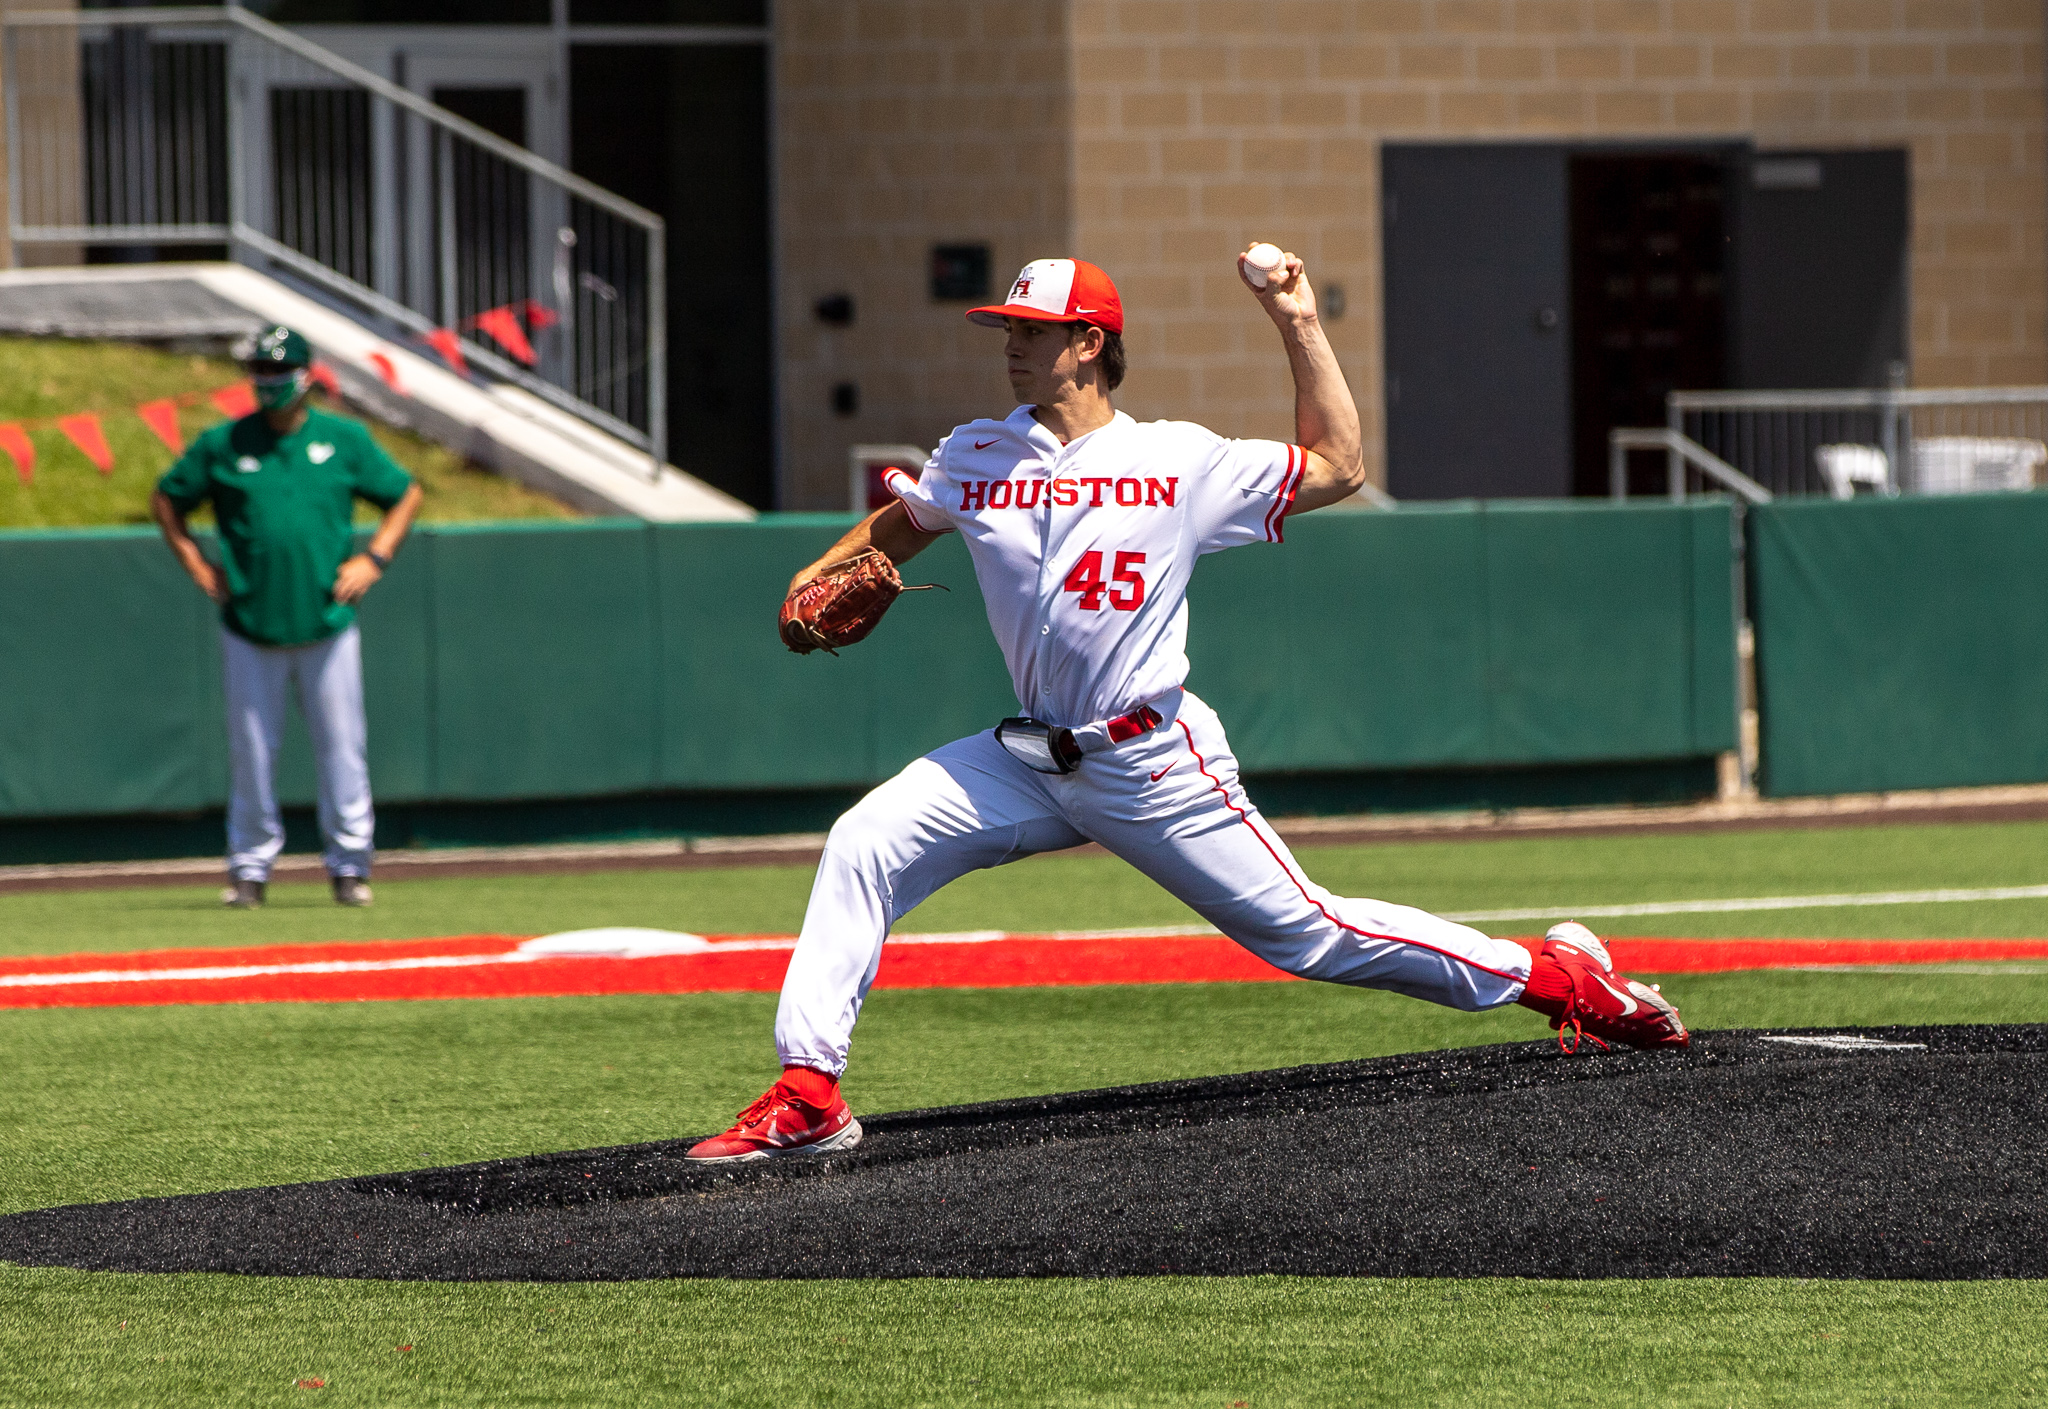 Junior left-hander Robert Gasser threw six innings of one-run baseball while striking out eight in UH's series opening loss to Tulane | Andy Yanez/The Cougar